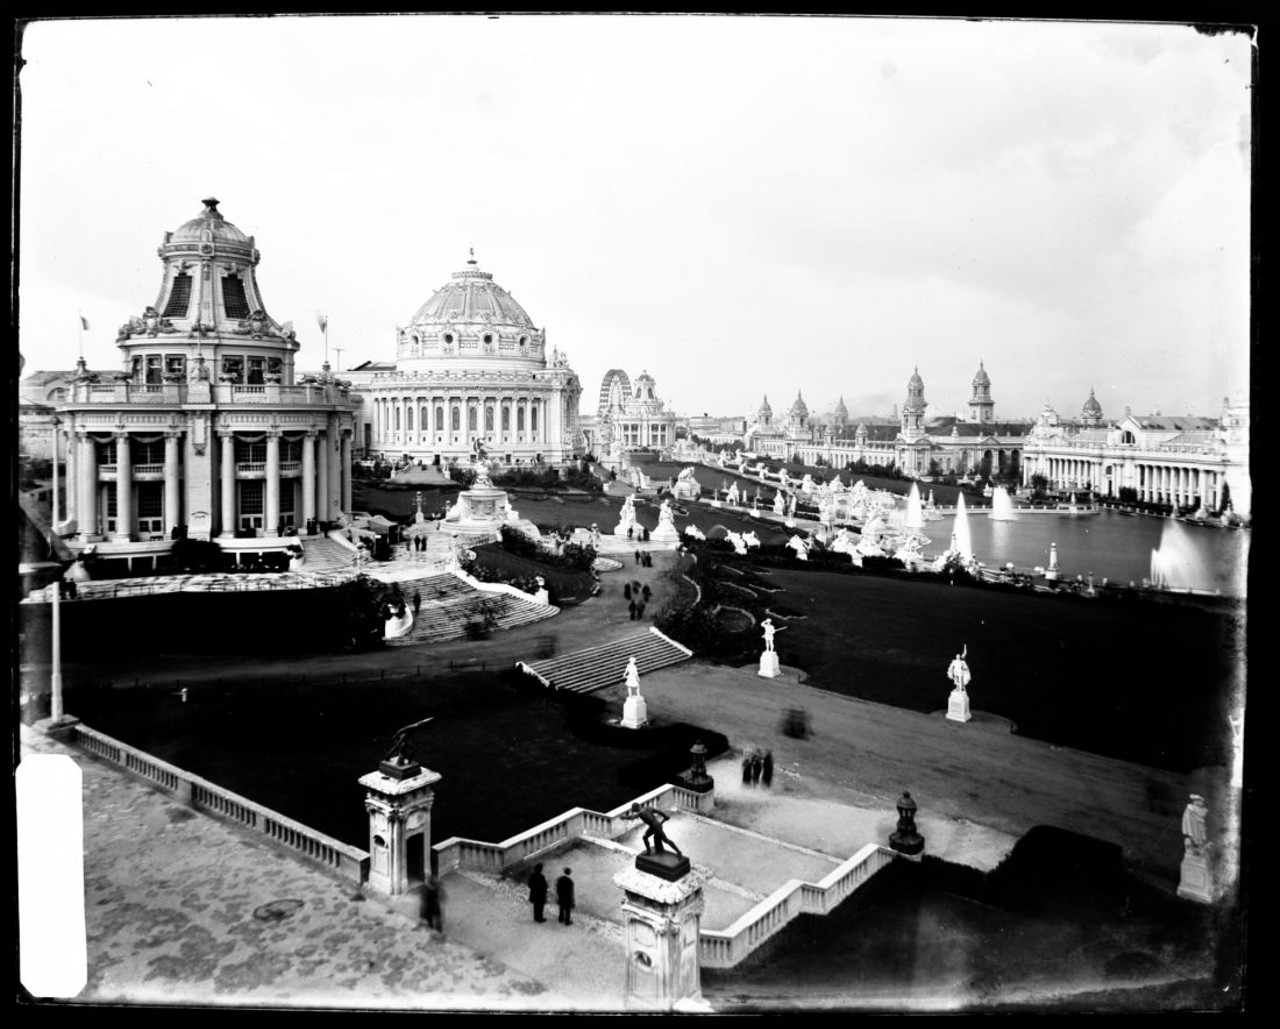 1904 WORLD'S FAIR VIEW OF CASCADES AND FESTIVAL HALL
Find out more about this photo at MoHistory.org.